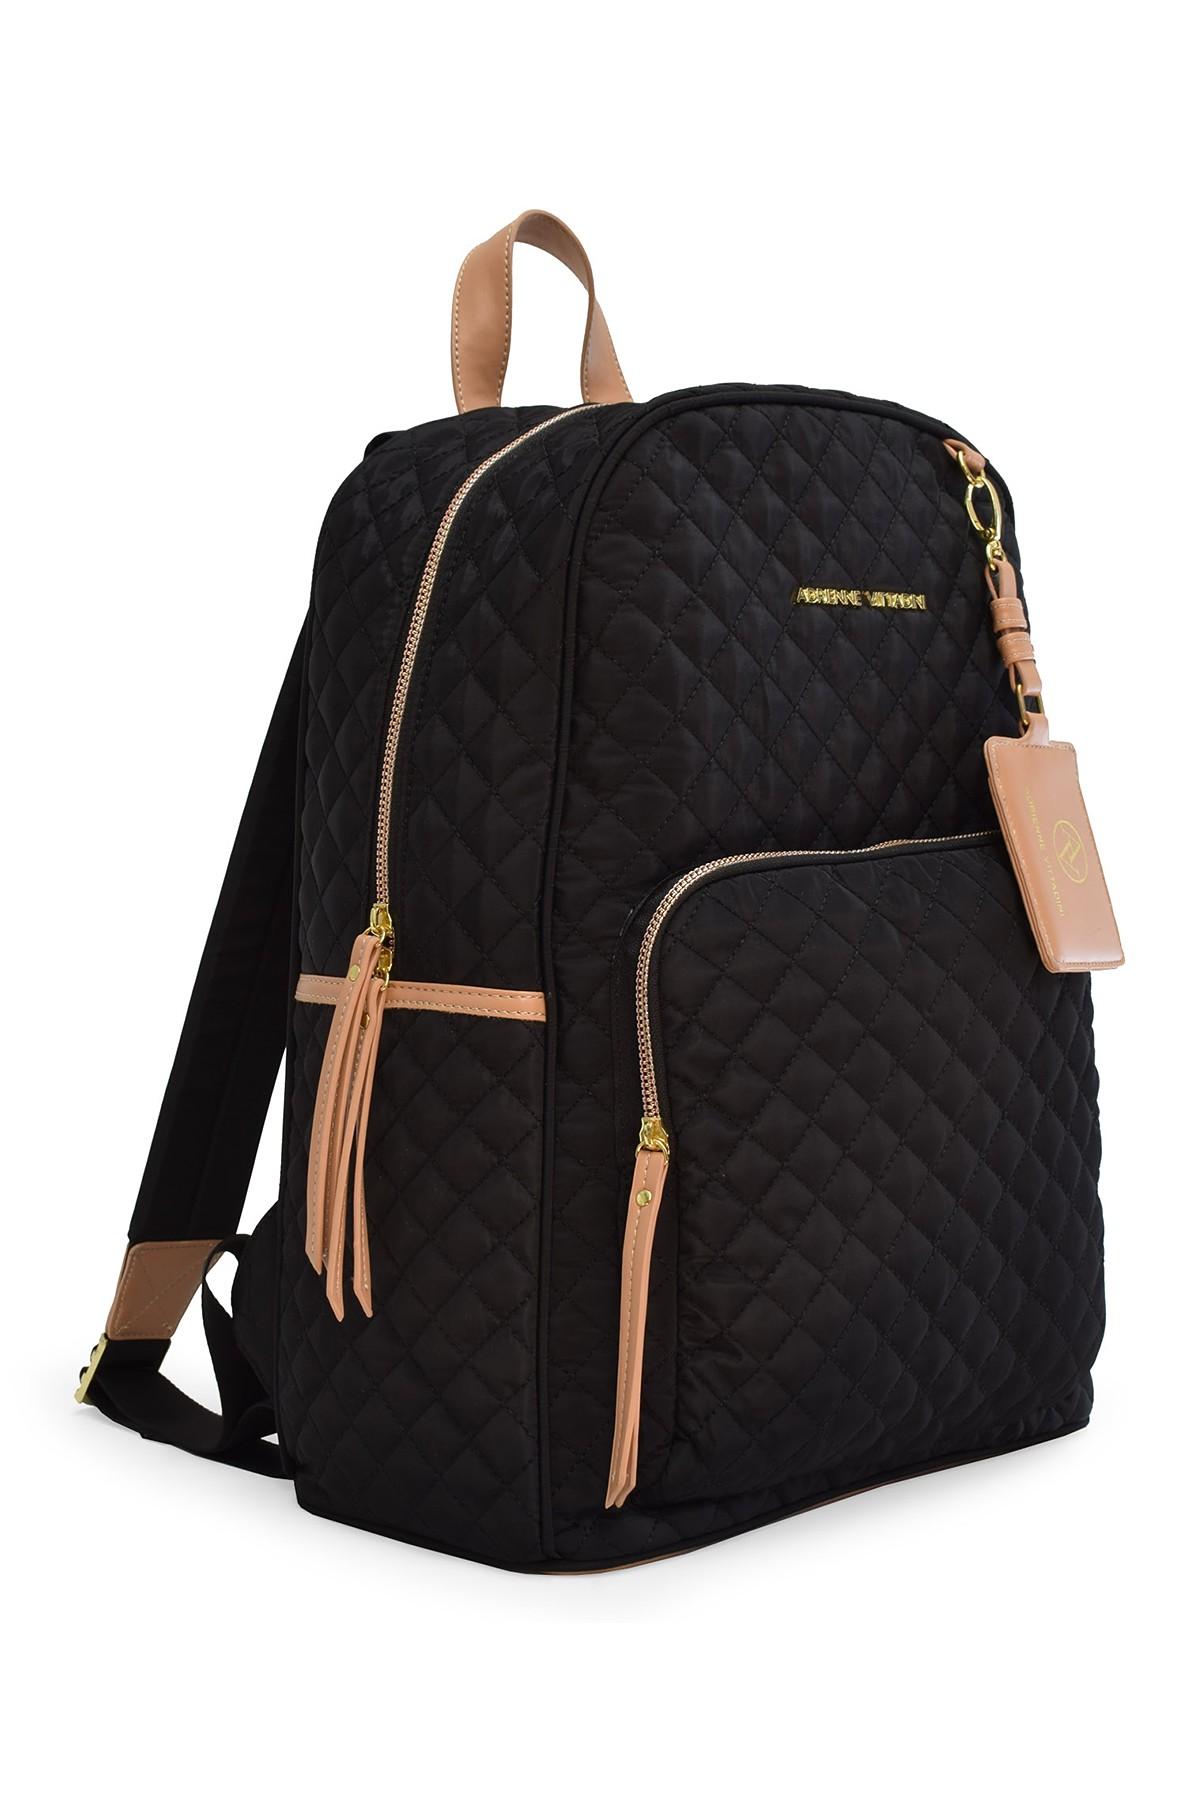 Adrienne Vittadini Synthetic Quilted Backpack in Black - Lyst